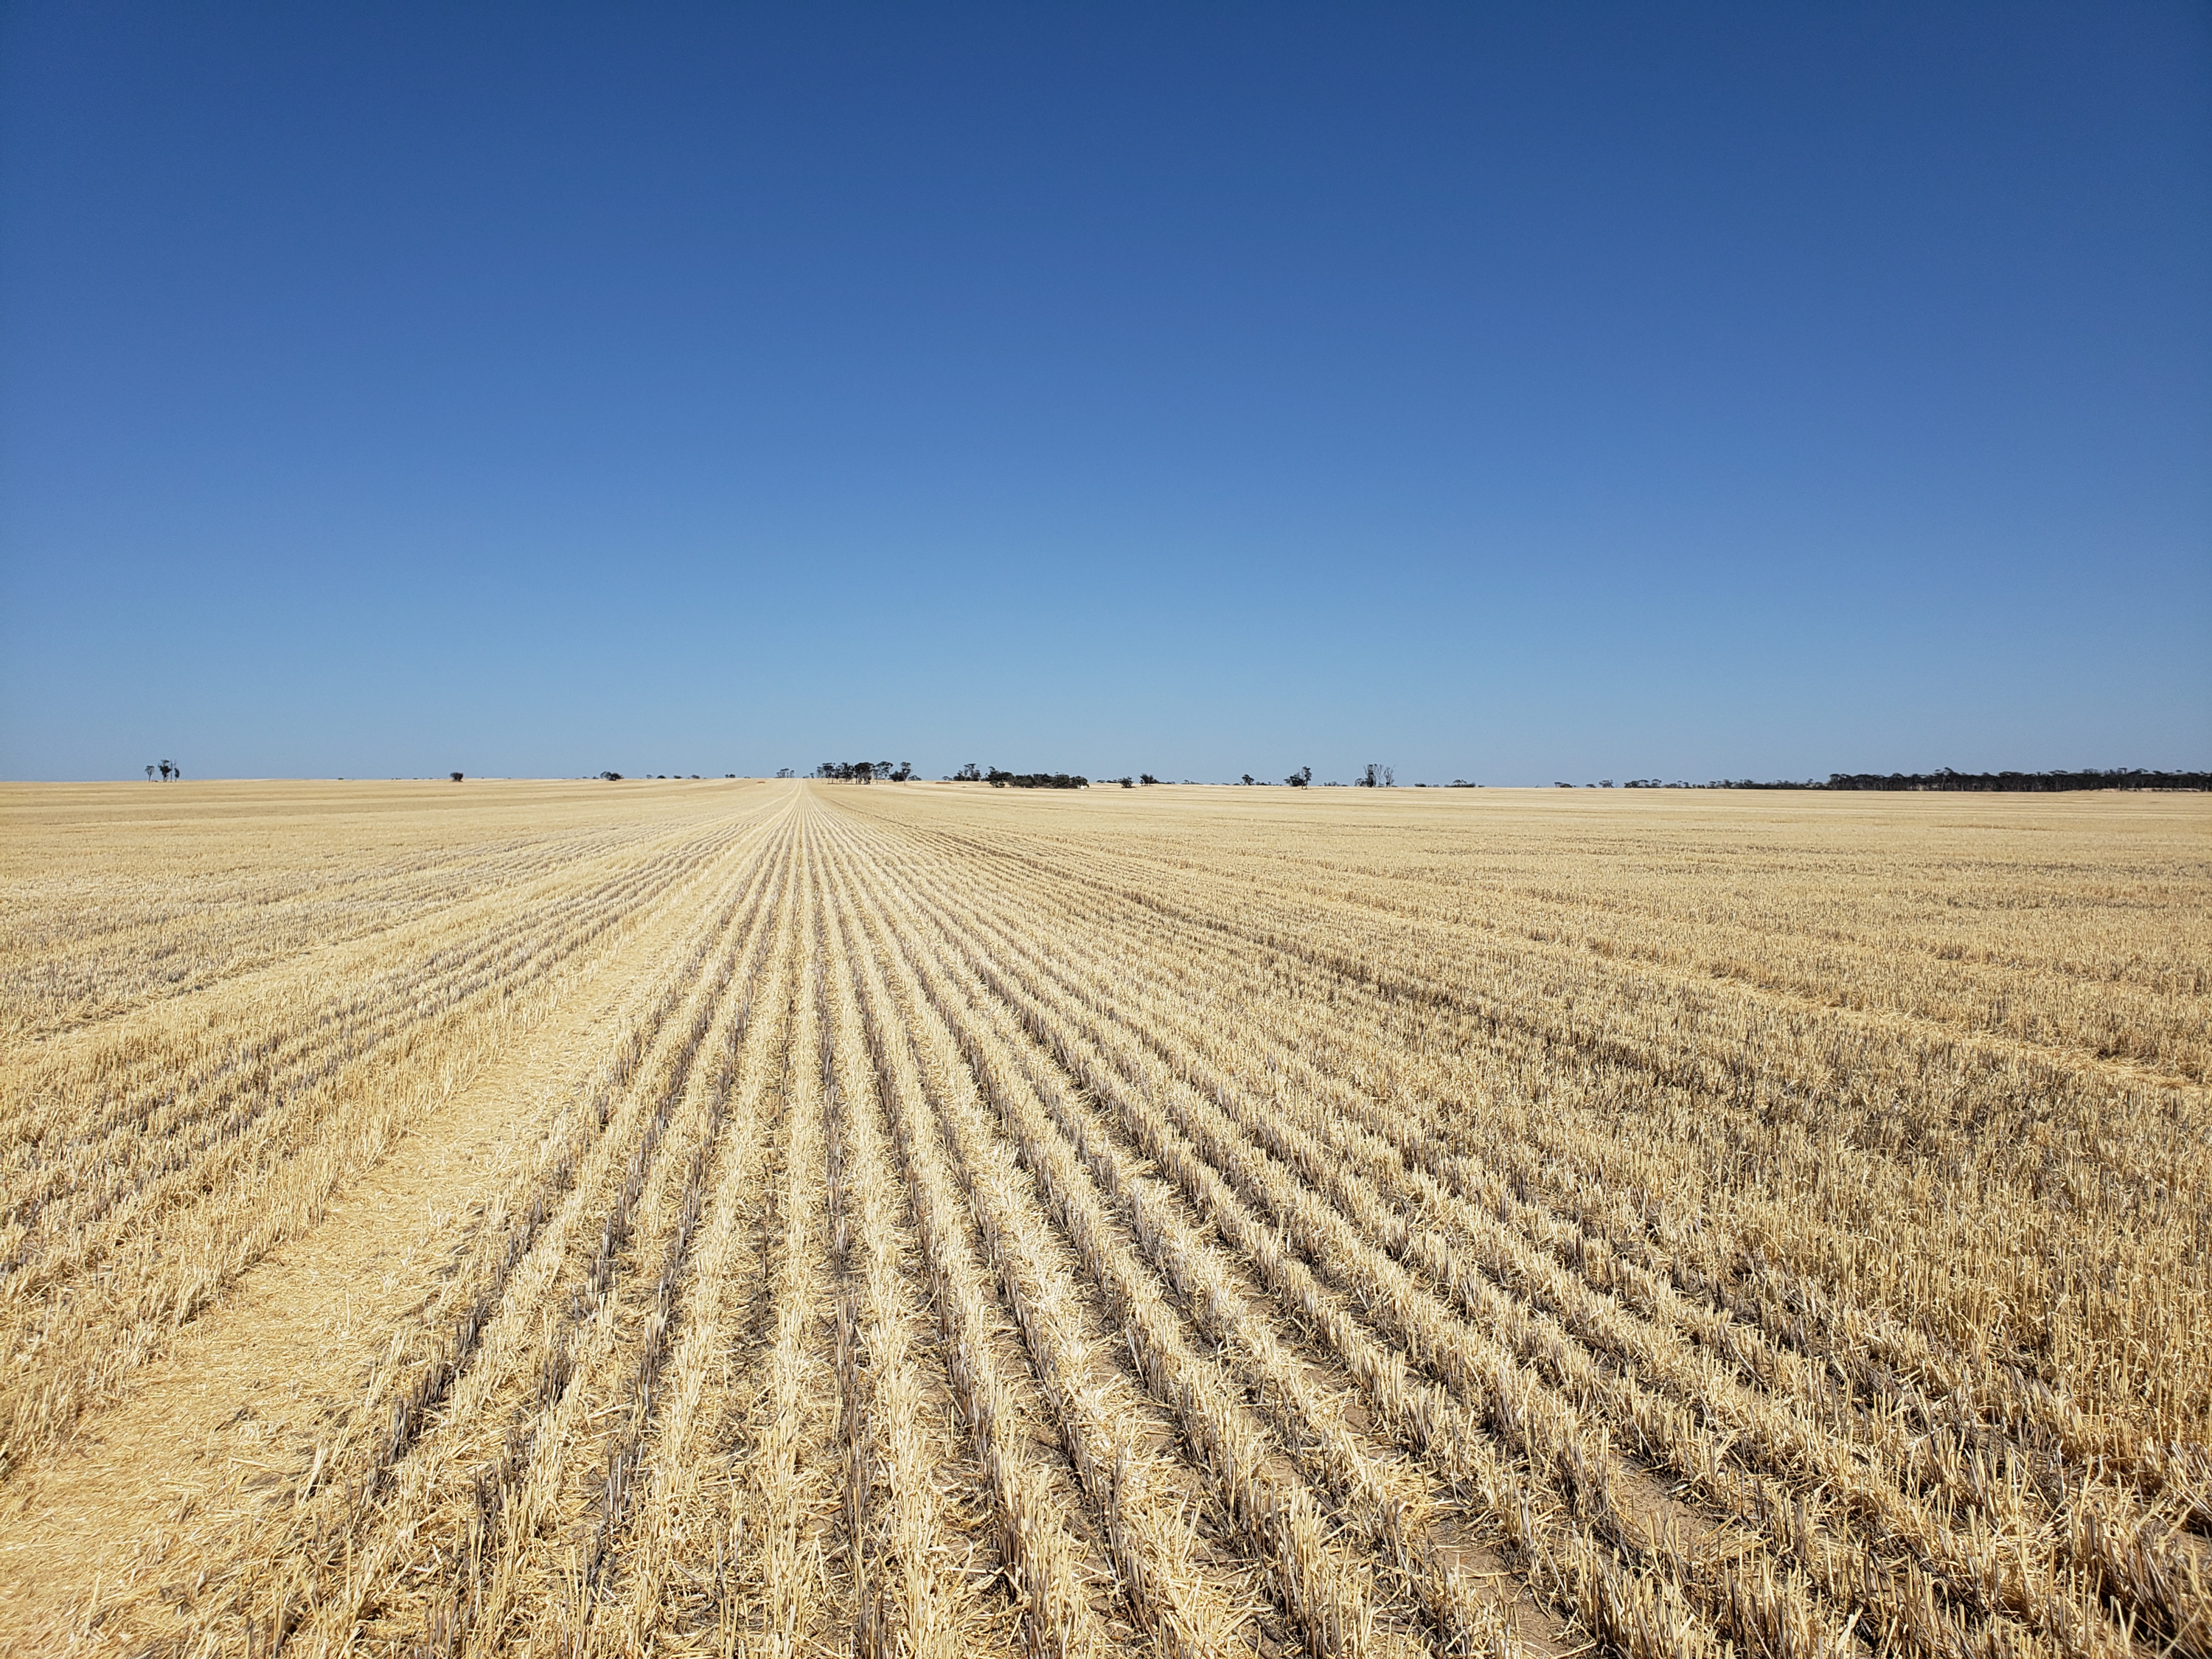 A chaff line in a harvested wheat field